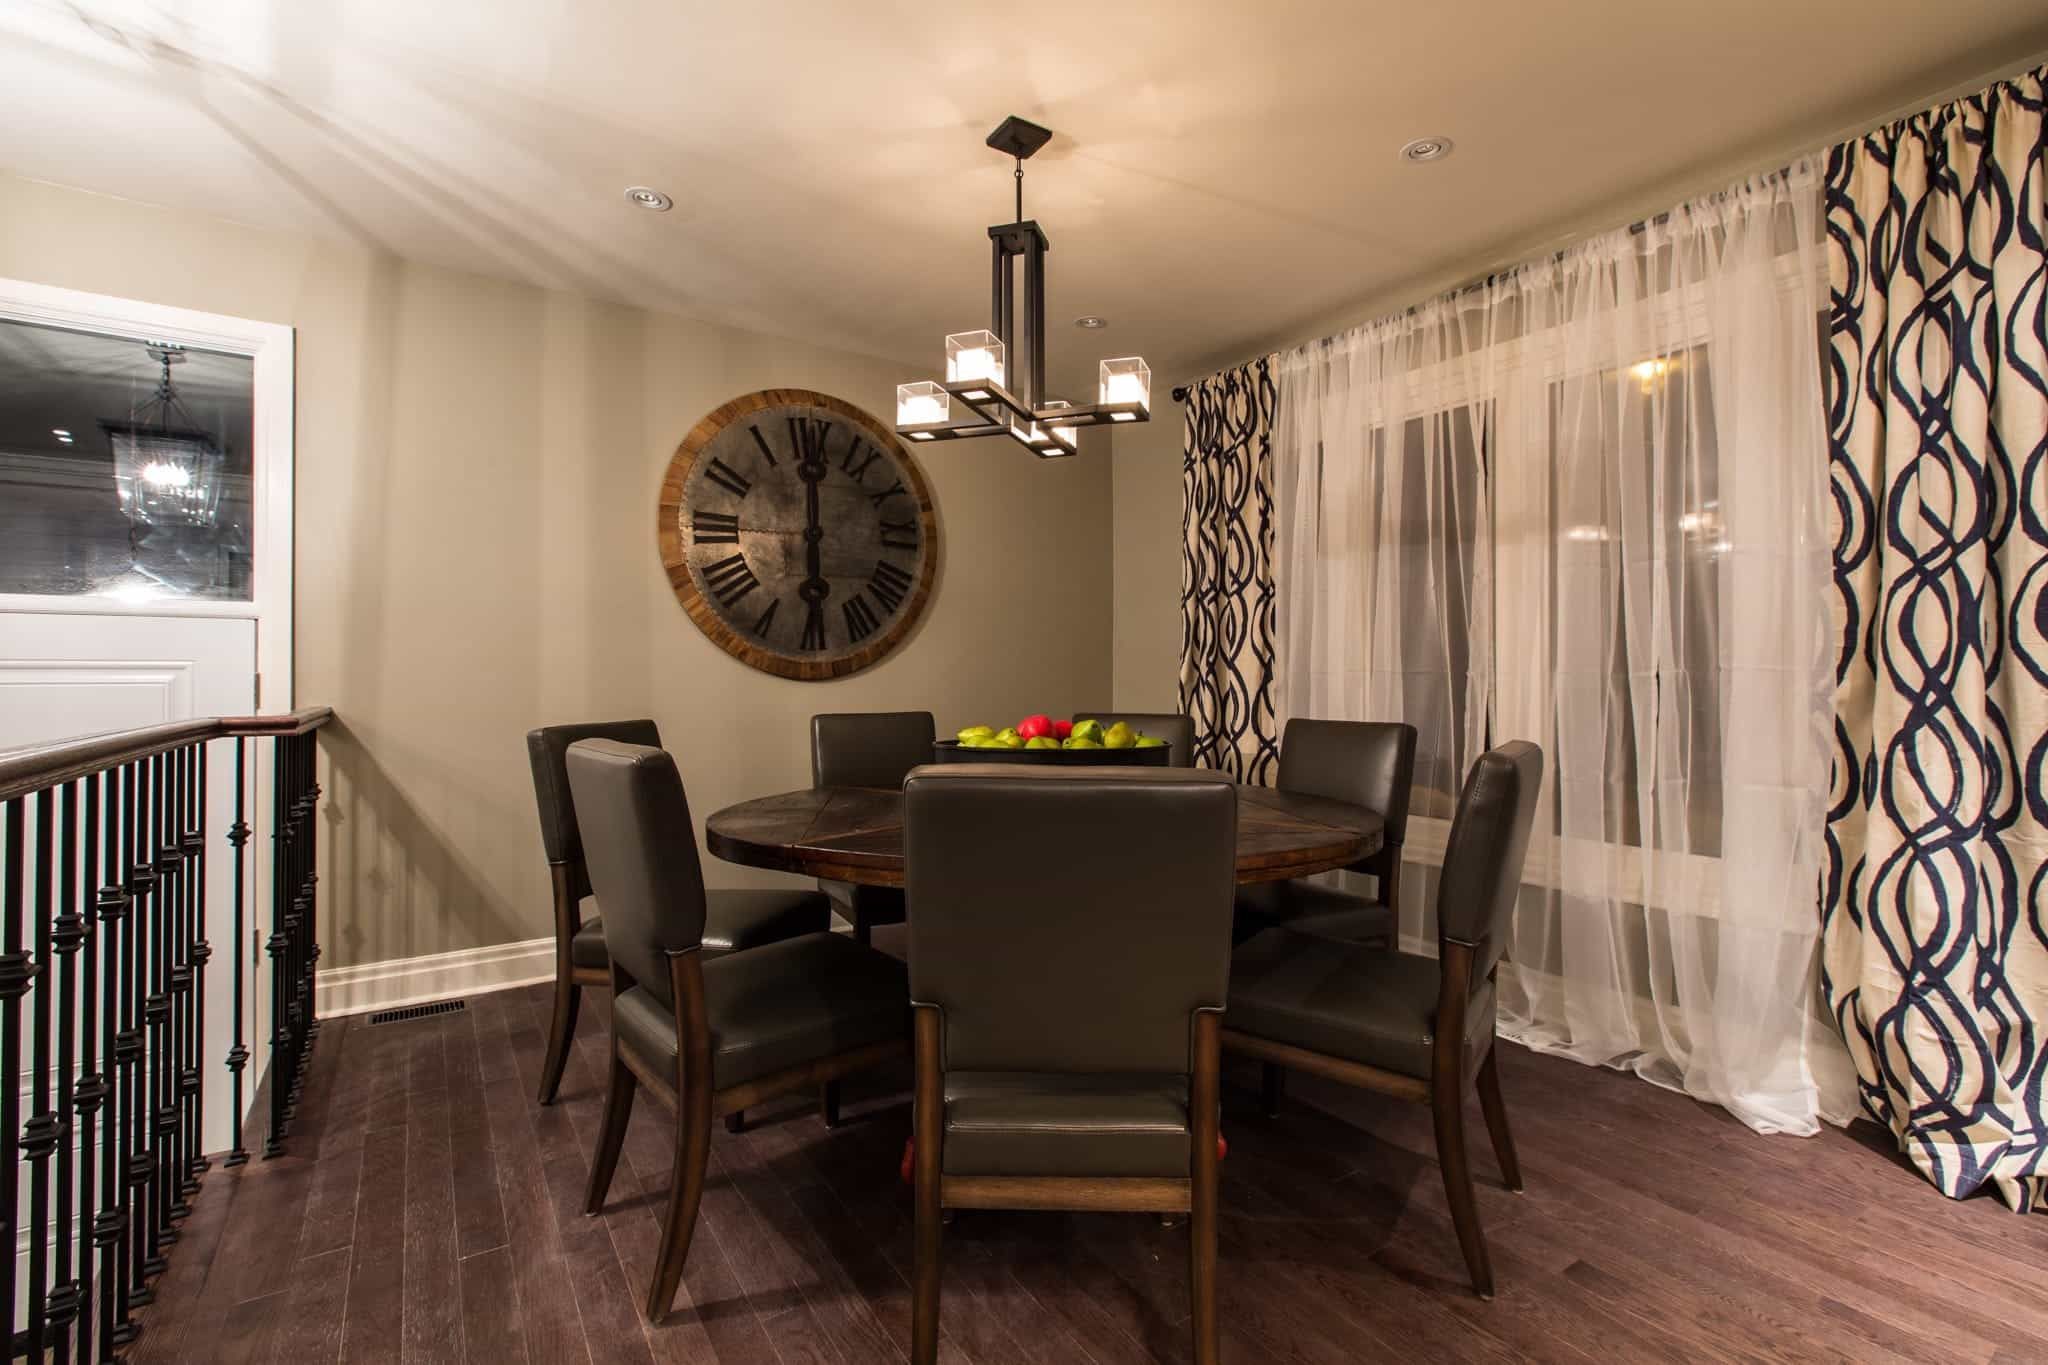 Dining Room With Round Table And Chairs Furniture Sets (View 11 of 25)